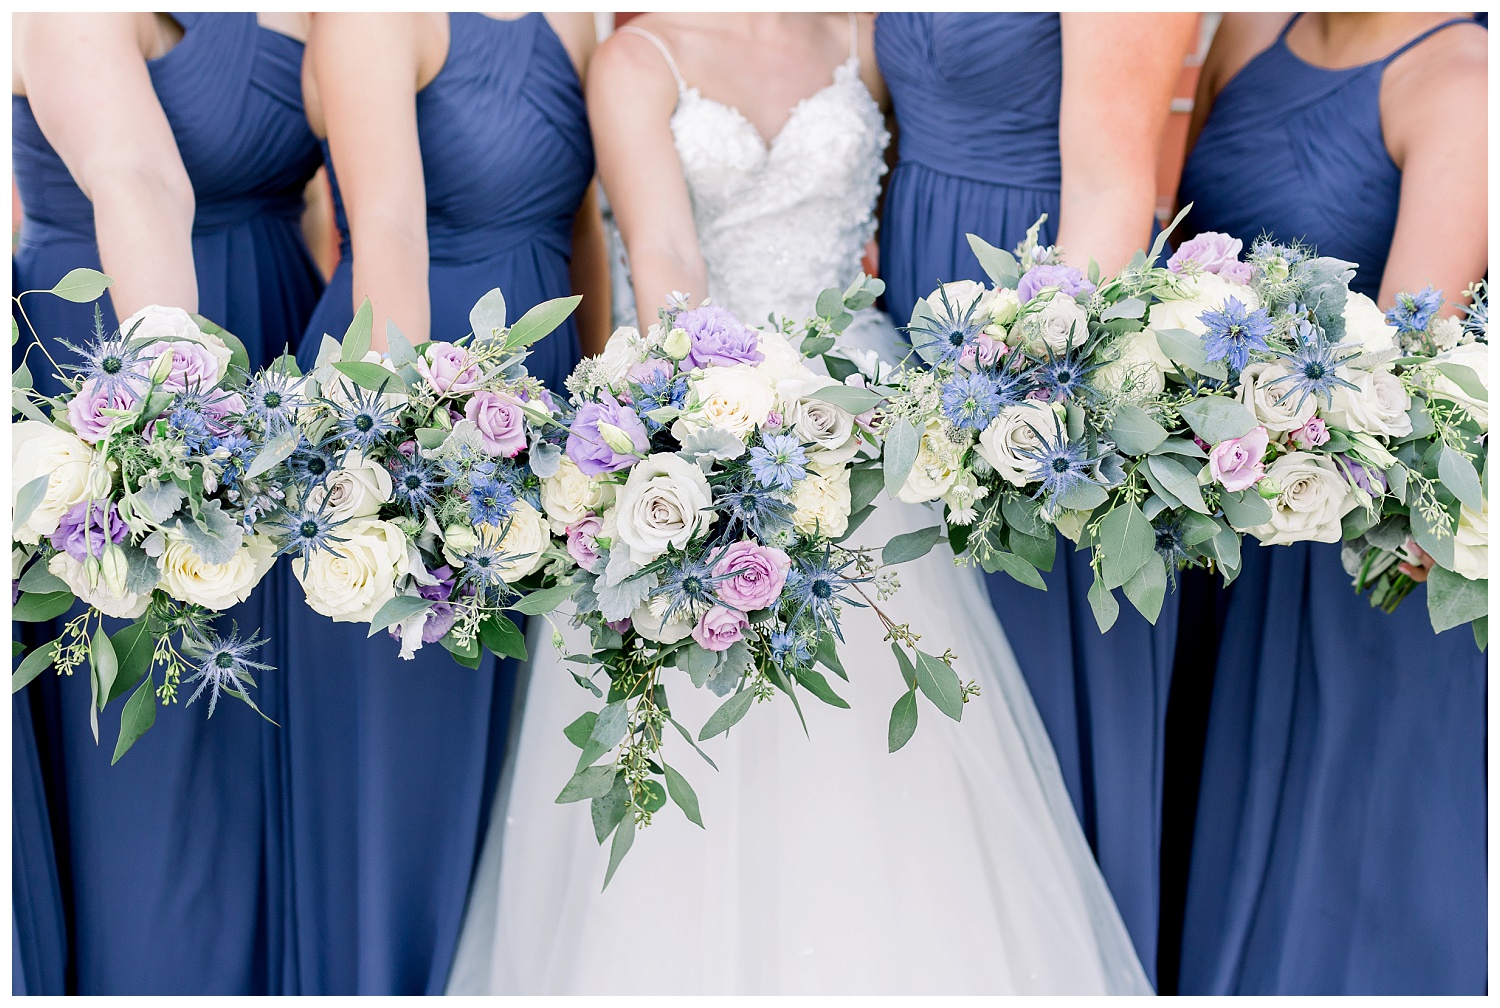 Purple bridesmaid dresses and bouquets